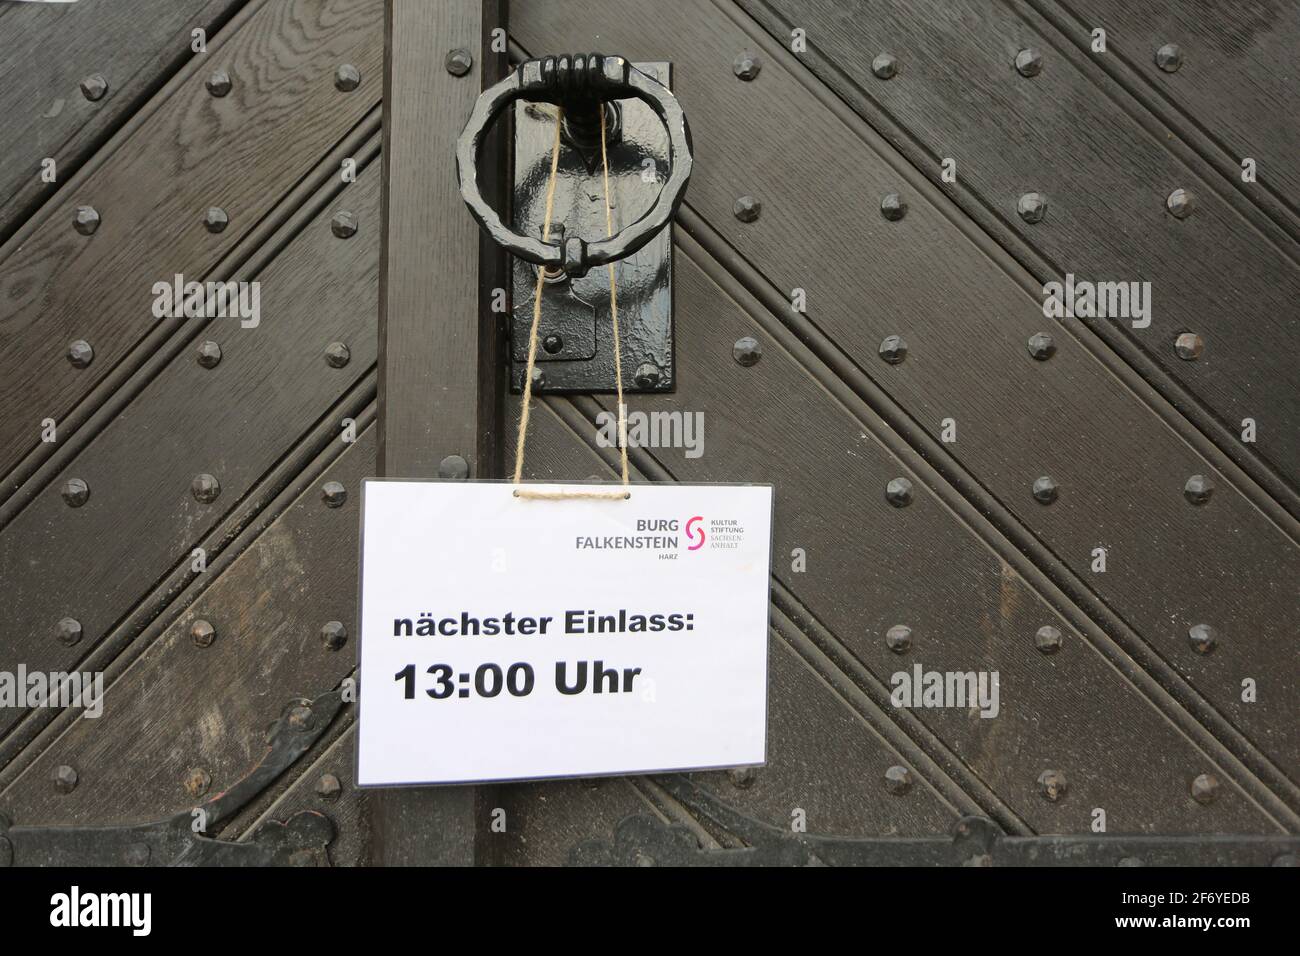 03 April 2021, Saxony-Anhalt, Pansfelde: 'Next admission 1 p.m.' is written on a sign hanging at the castle gate. Falkenstein Castle in the southern Harz region is open to visitors again for the first time after a long break due to the Corona pandemic. After booking by phone, visitors can tour the castle grounds as well as experience a falconry demonstration. The castle is located above the Selketal. The fortified complex was built at the beginning of the 12th century and passed as a fiefdom to the noble Asseburg family in the 15th century. Photo: Matthias Bein/dpa-Zentralbild/dpa Stock Photo